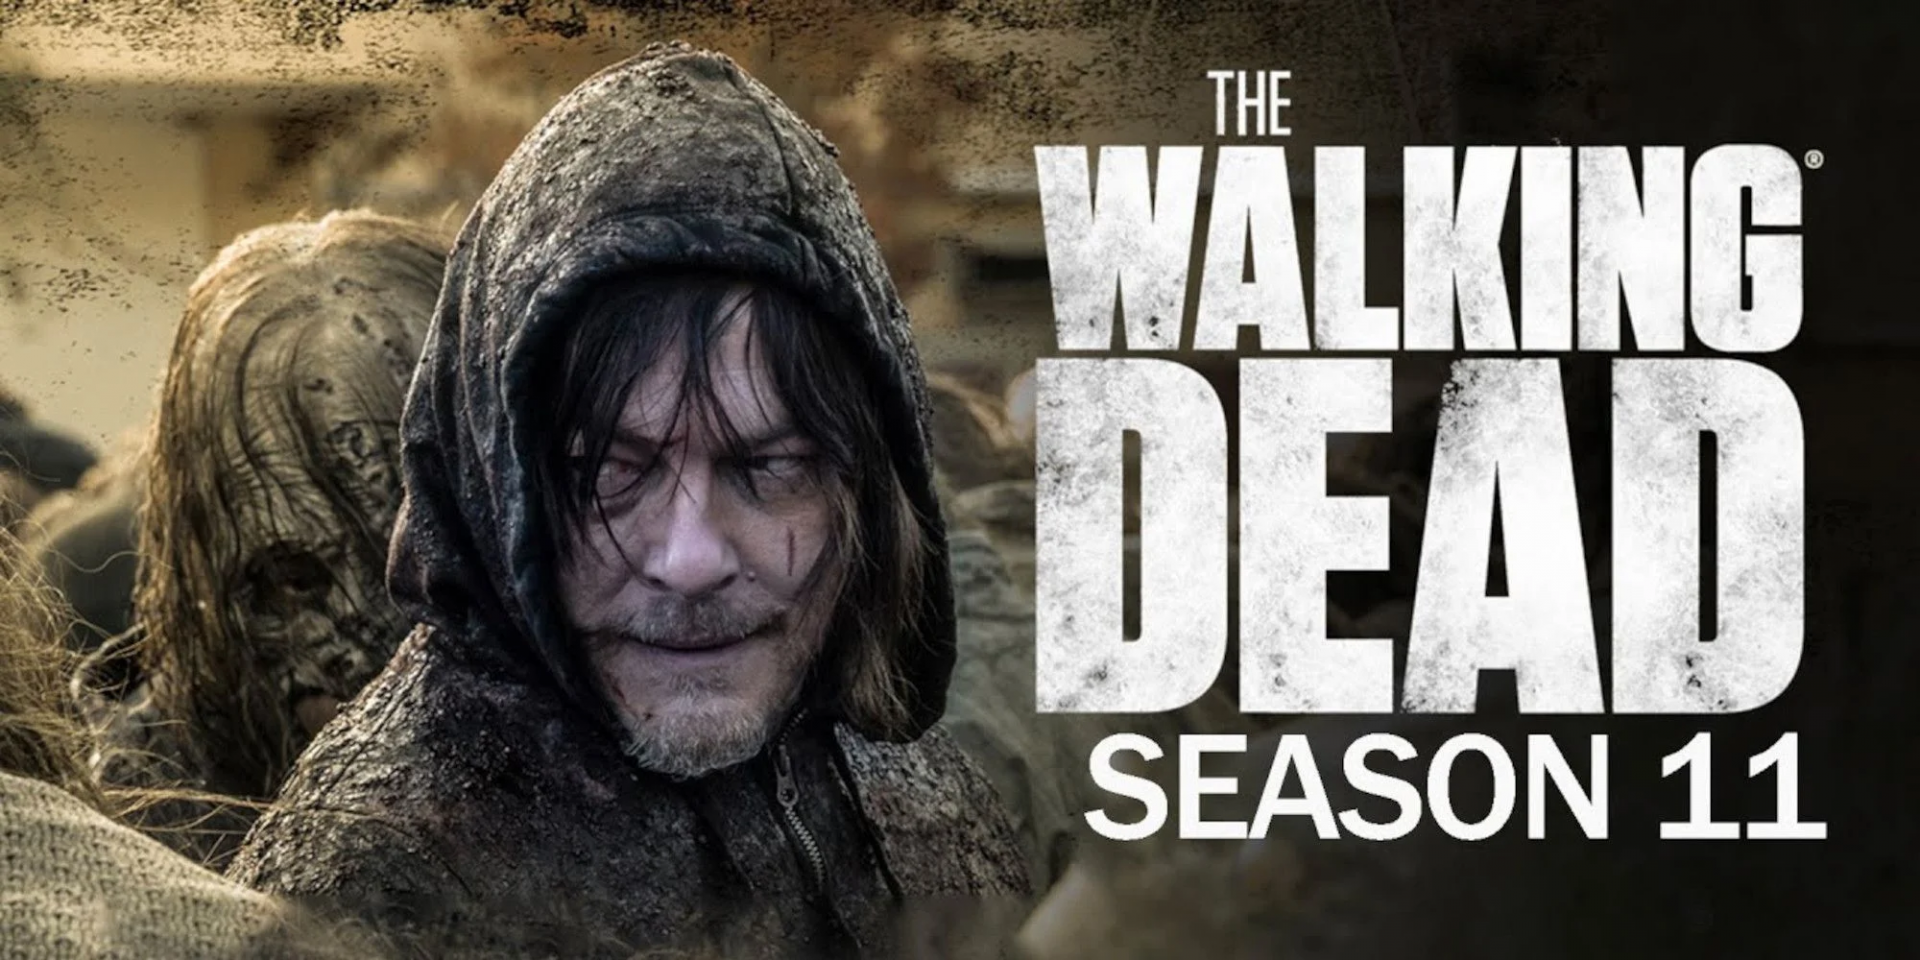 The Walking Dead Season 11: Release Date, Trailer, Cast, Episodes and Latest News